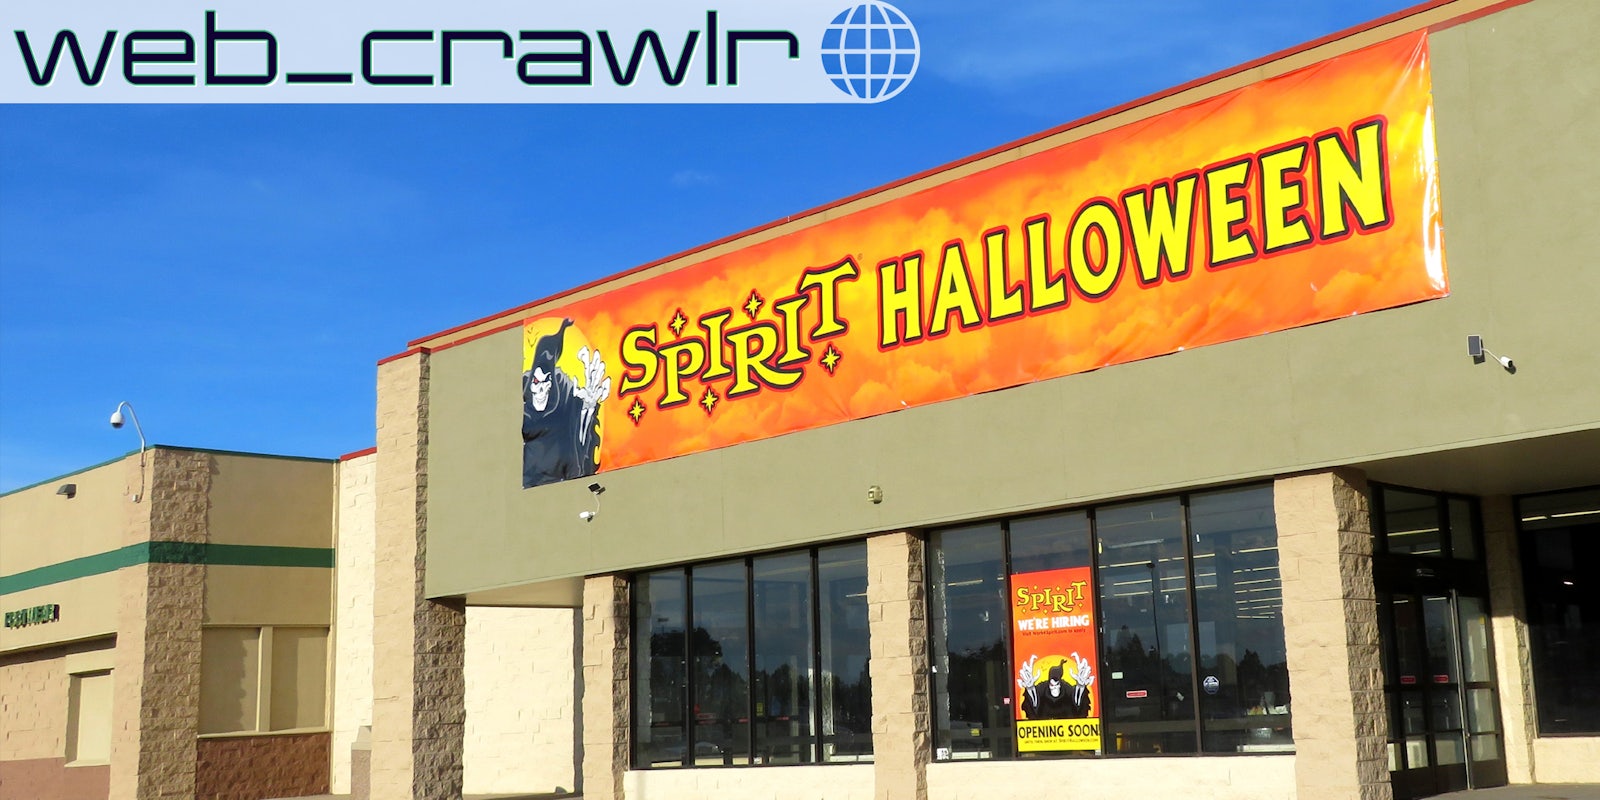 A Spirit Halloween store. The Daily Dot newsletter web_crawlr logo is in the top left corner.